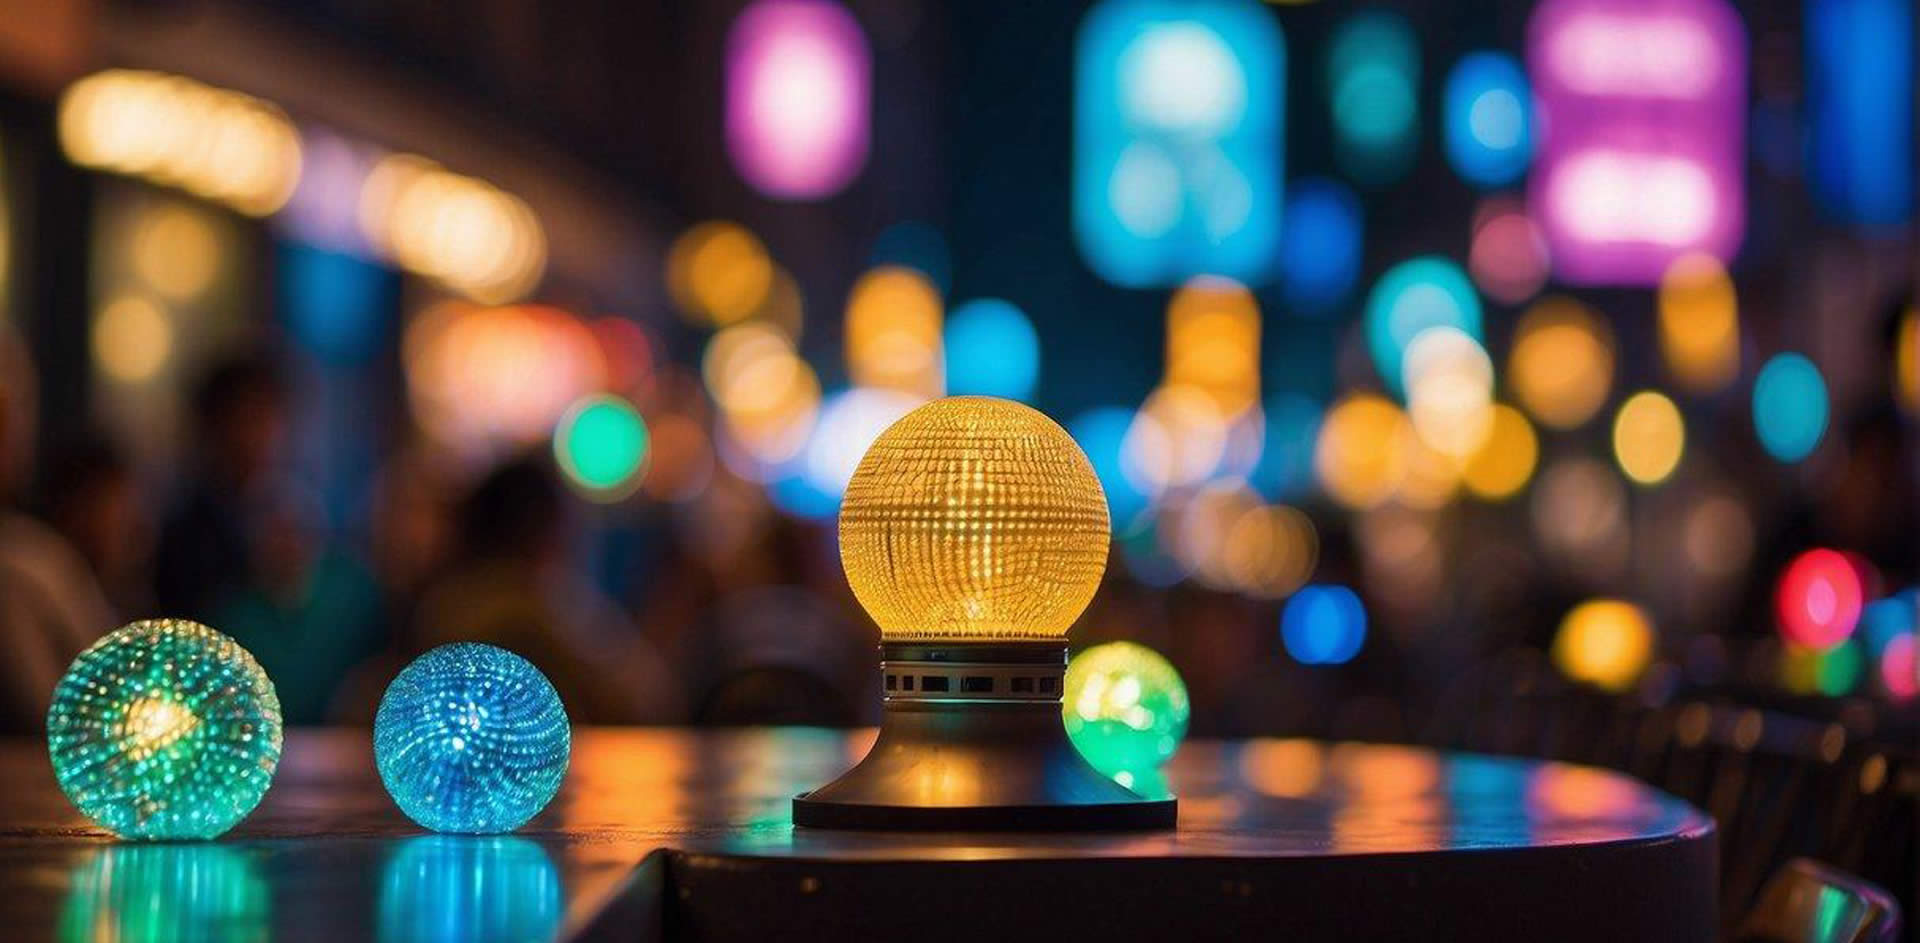 Colorful lights illuminate the bustling streets. Music fills the air as people enjoy dining, dancing, and live performances at various venues. The energetic atmosphere is alive with excitement and vibrant nightlife